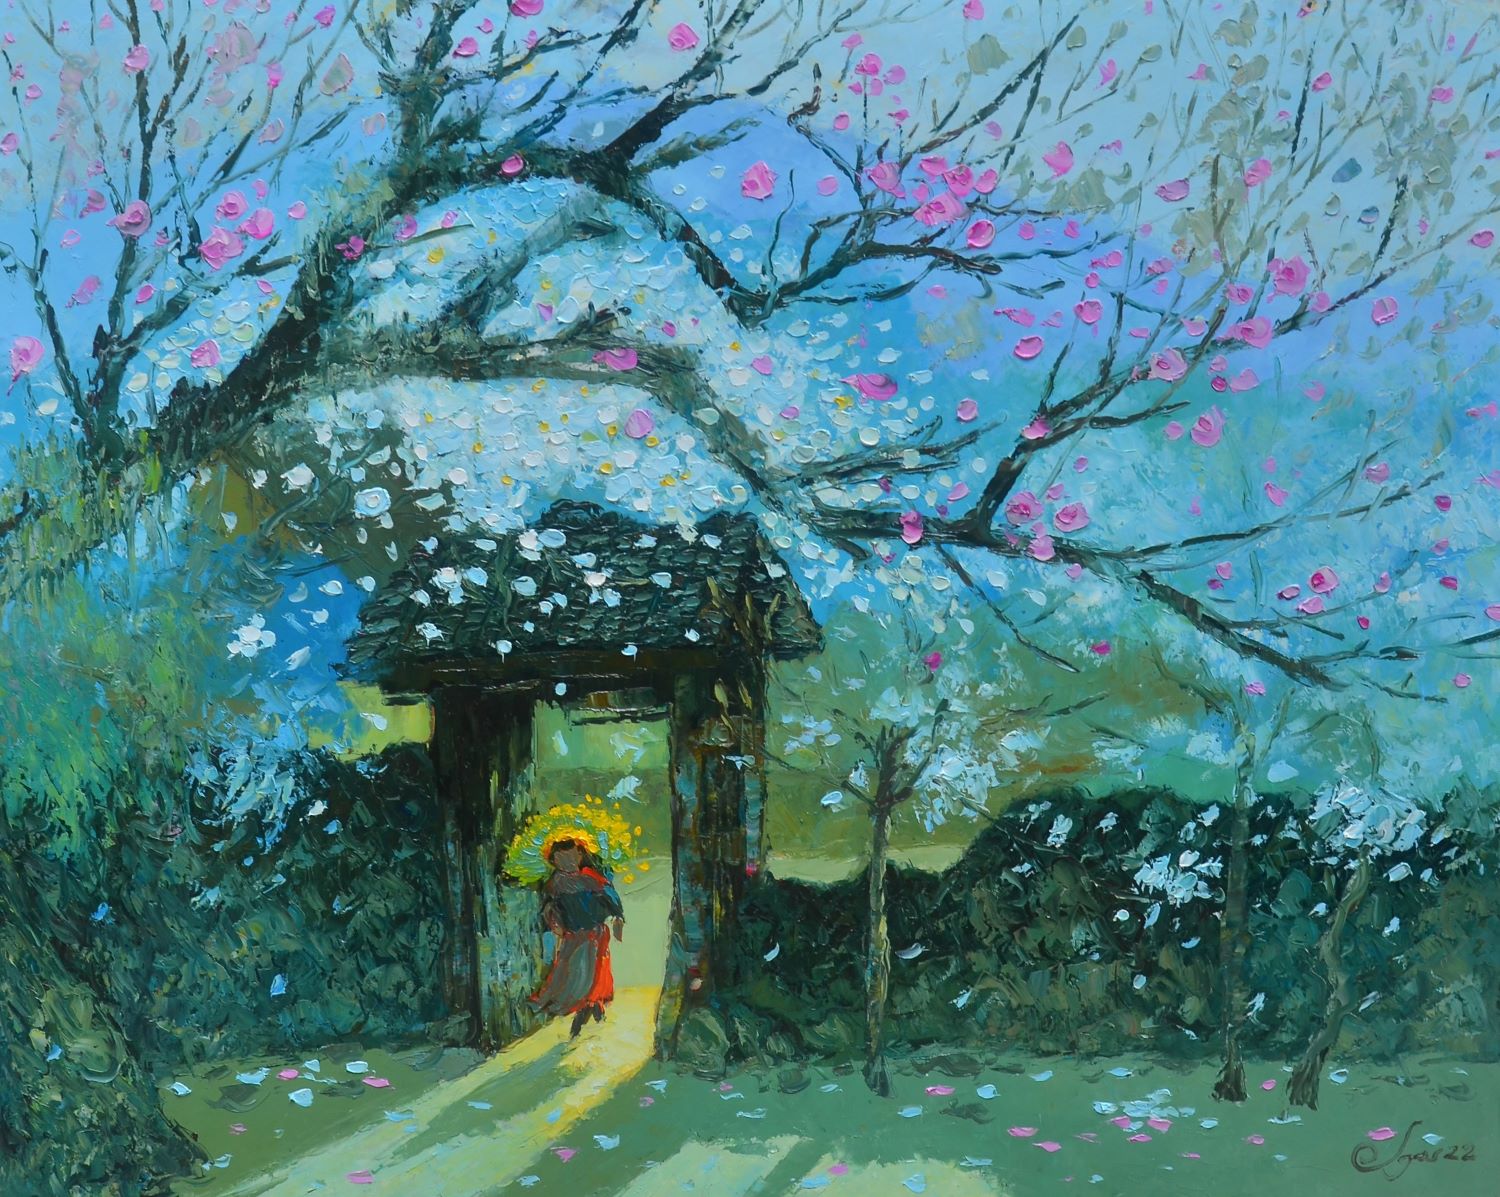 My Spring - Vietnamese Oil Painting by Artist Dang Dinh Ngo